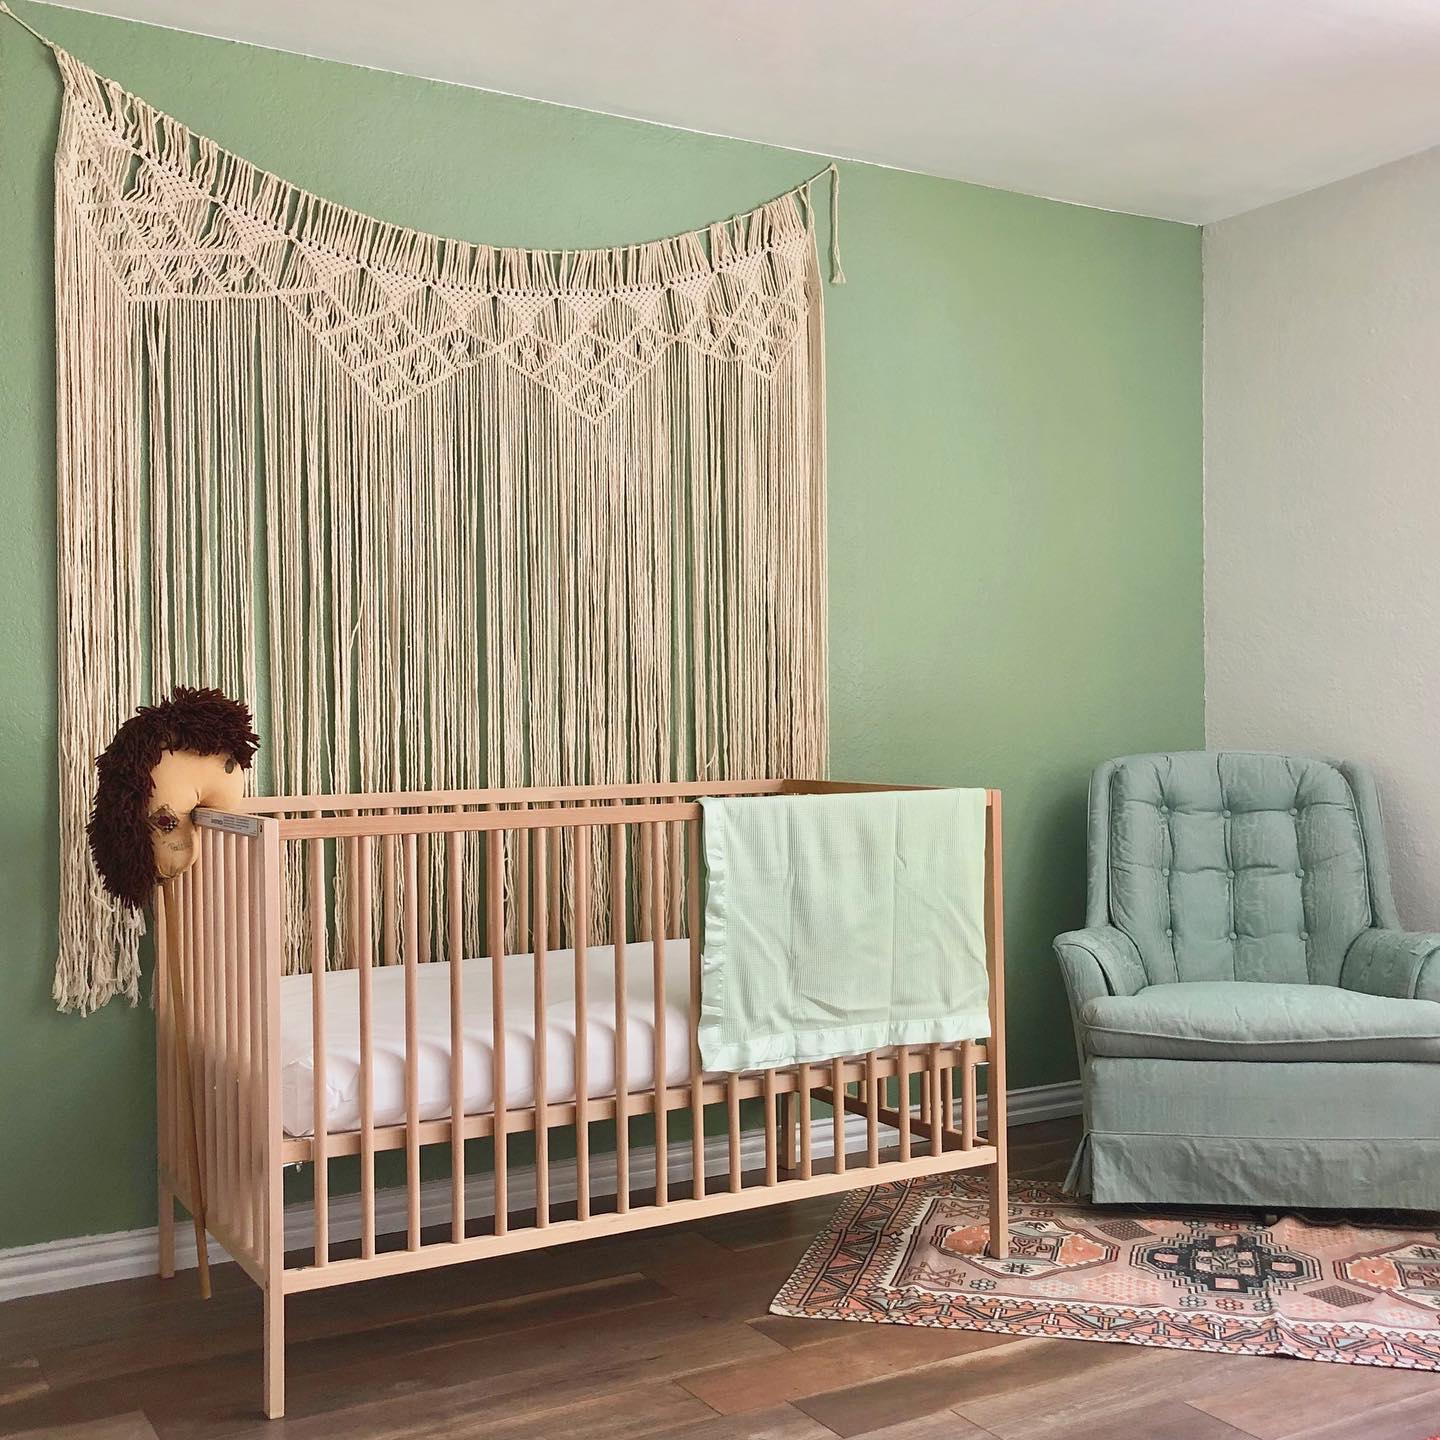 Sage green nursery with large macrame wall hanging and rocking chair. Photo by Instagram user @_sincerelyus